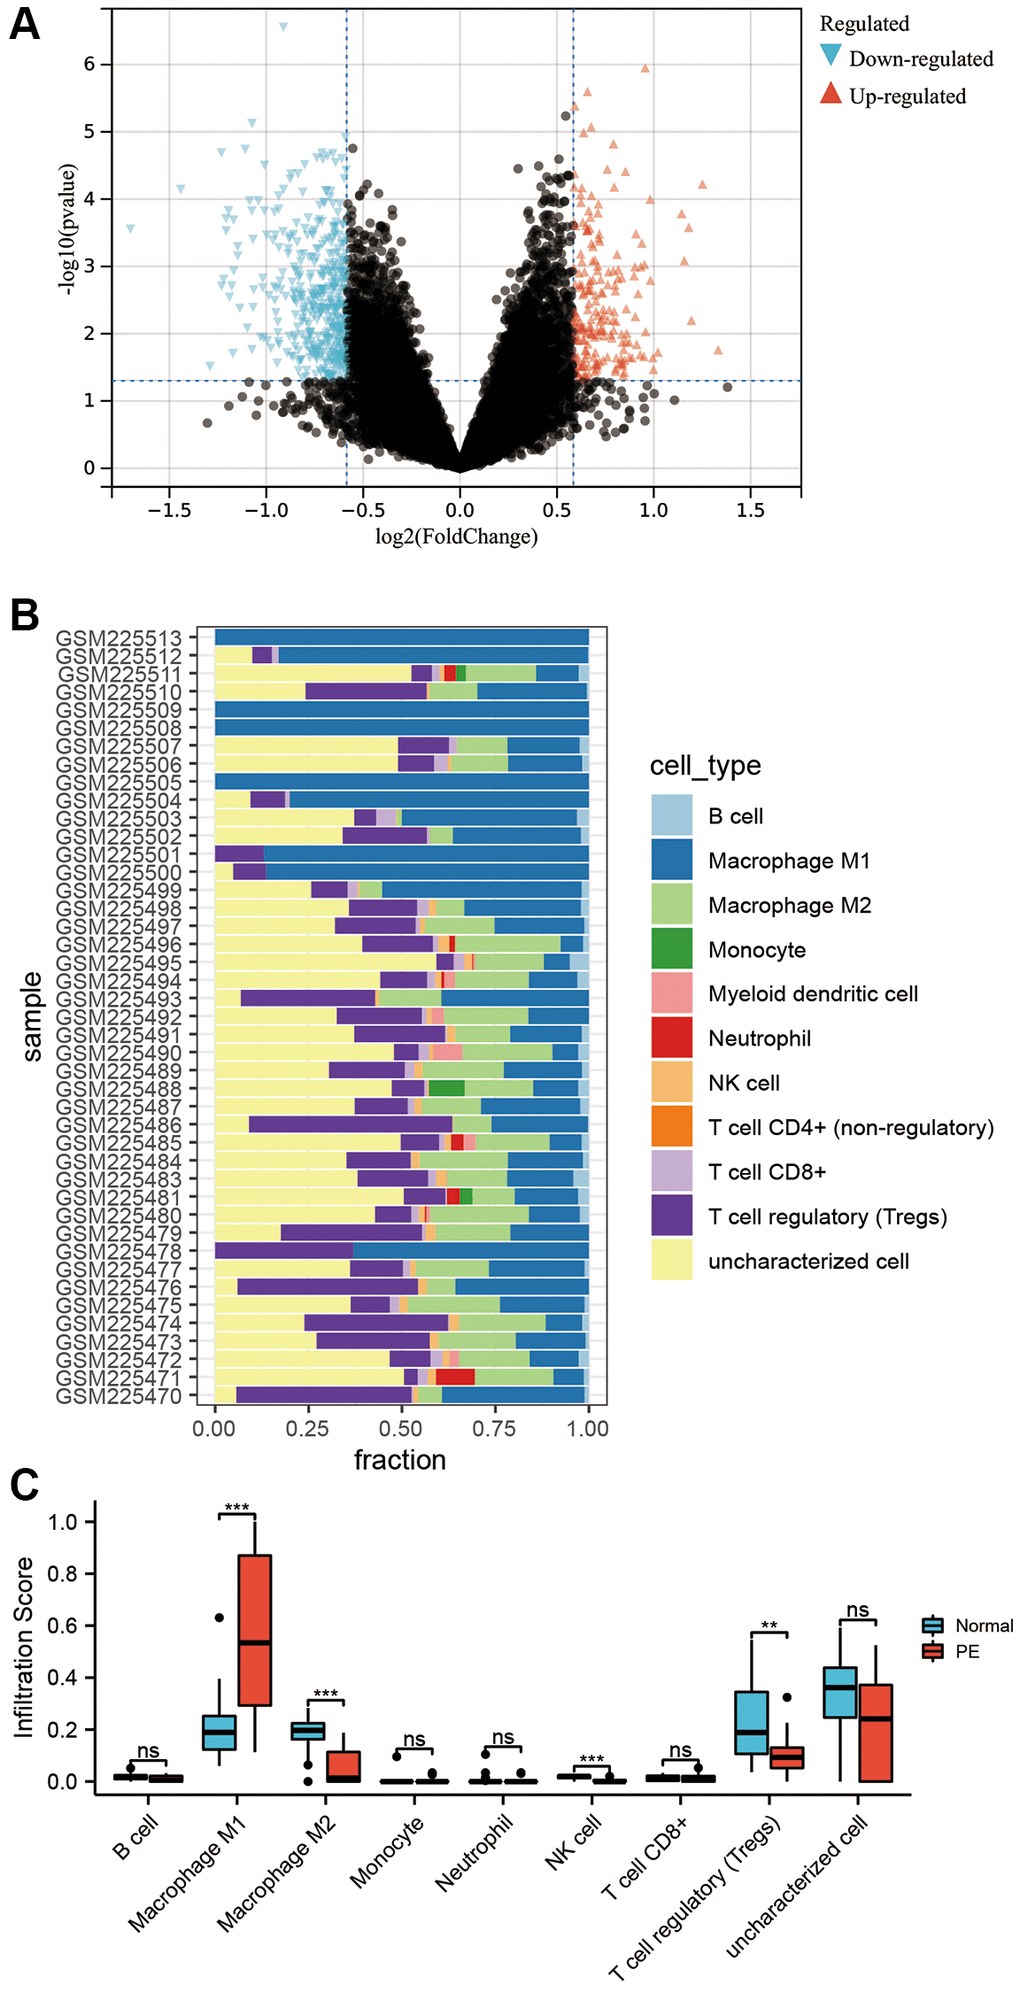 Transcriptome differential analysis and immune infiltration. (A) Volcano plot of differentially expressed mRNA in the GSE10588 dataset between the PE group and normal controls. (B) Scores of 10 types of immune cell infiltration in each sample of the GSE10588 dataset. (C) Differences in immune cell infiltration scores between the PE group and normal controls in the GSE10588 dataset.